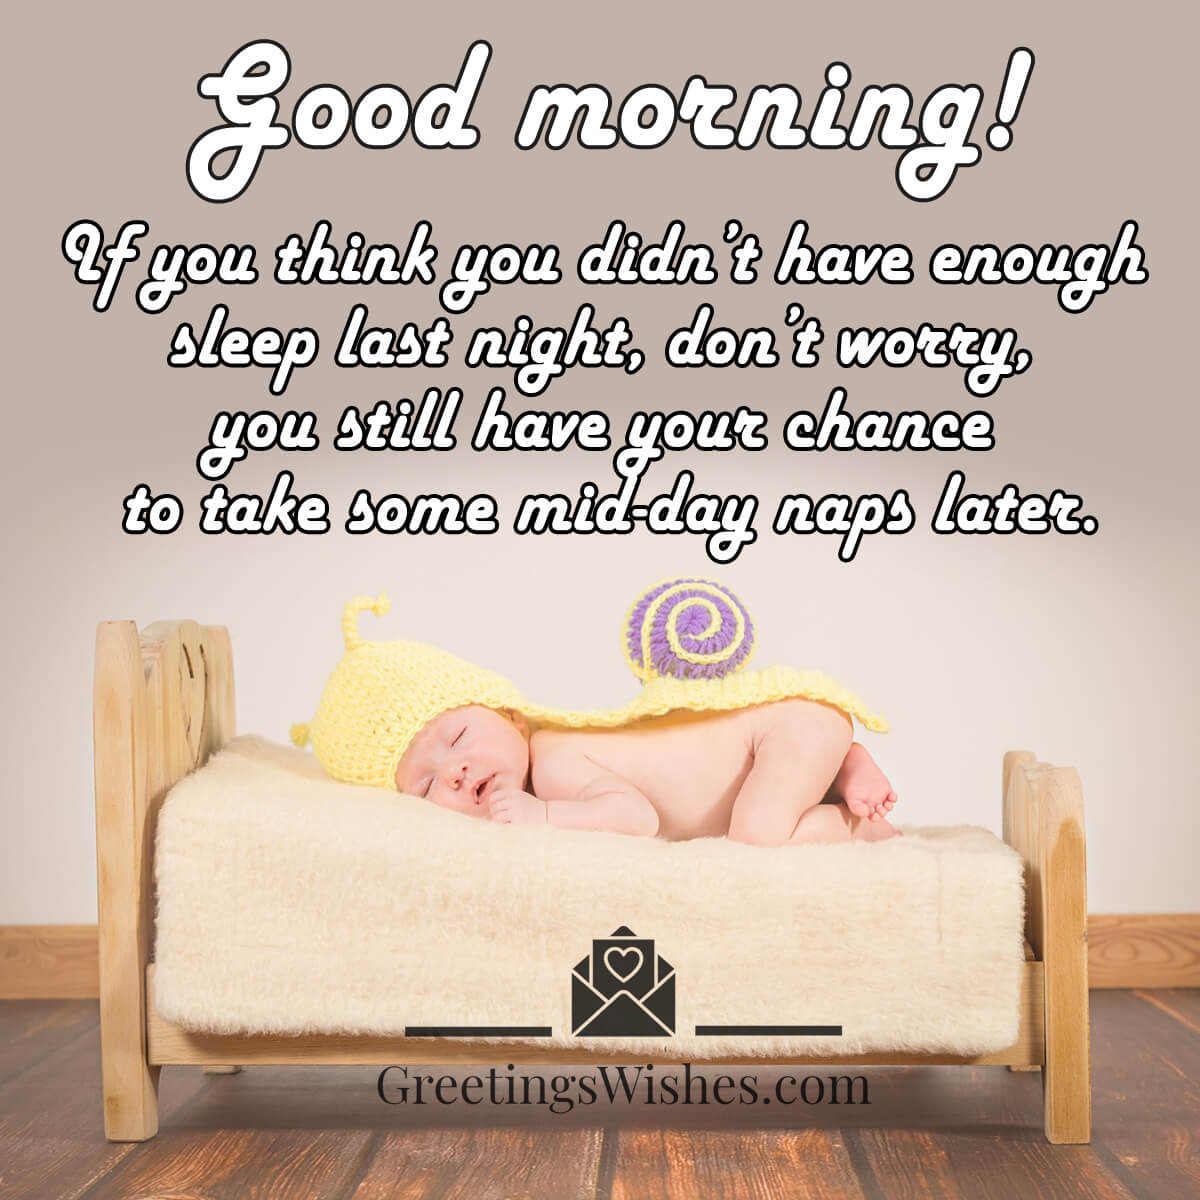 Funny Good Morning Wishes - Greetings Wishes